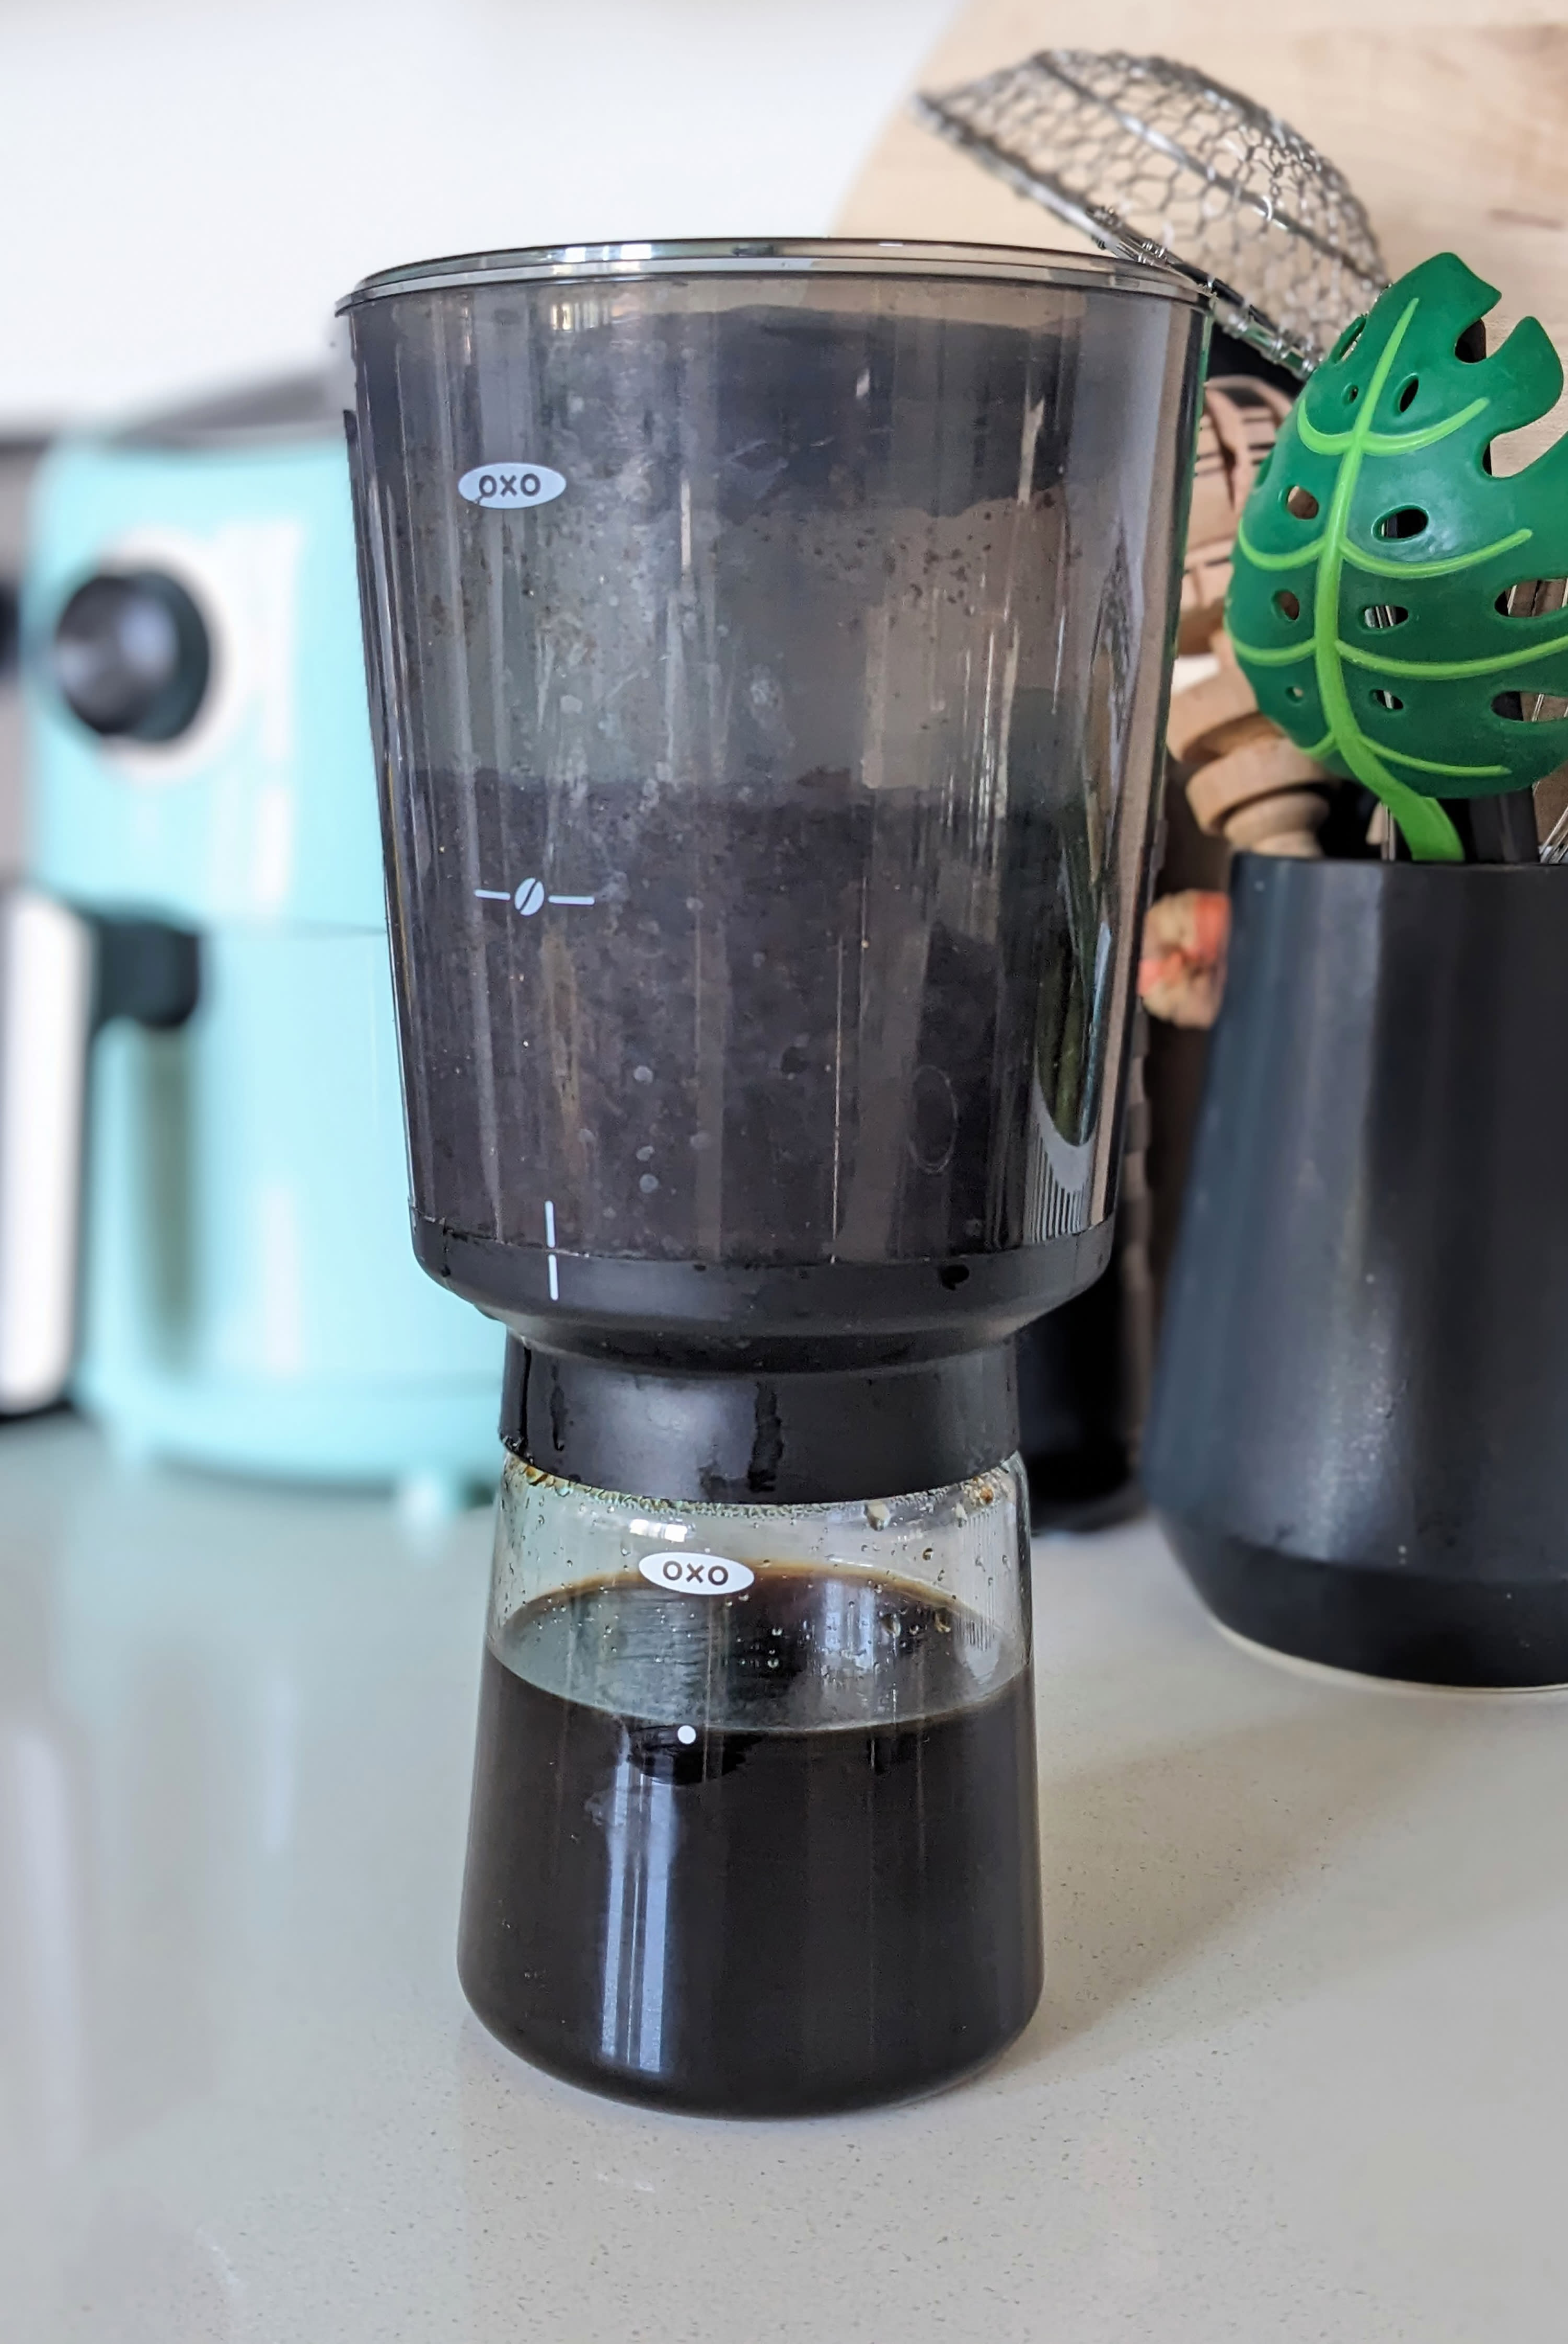 OXO Compact Cold Brew Coffee Maker Review - Tested, Photos